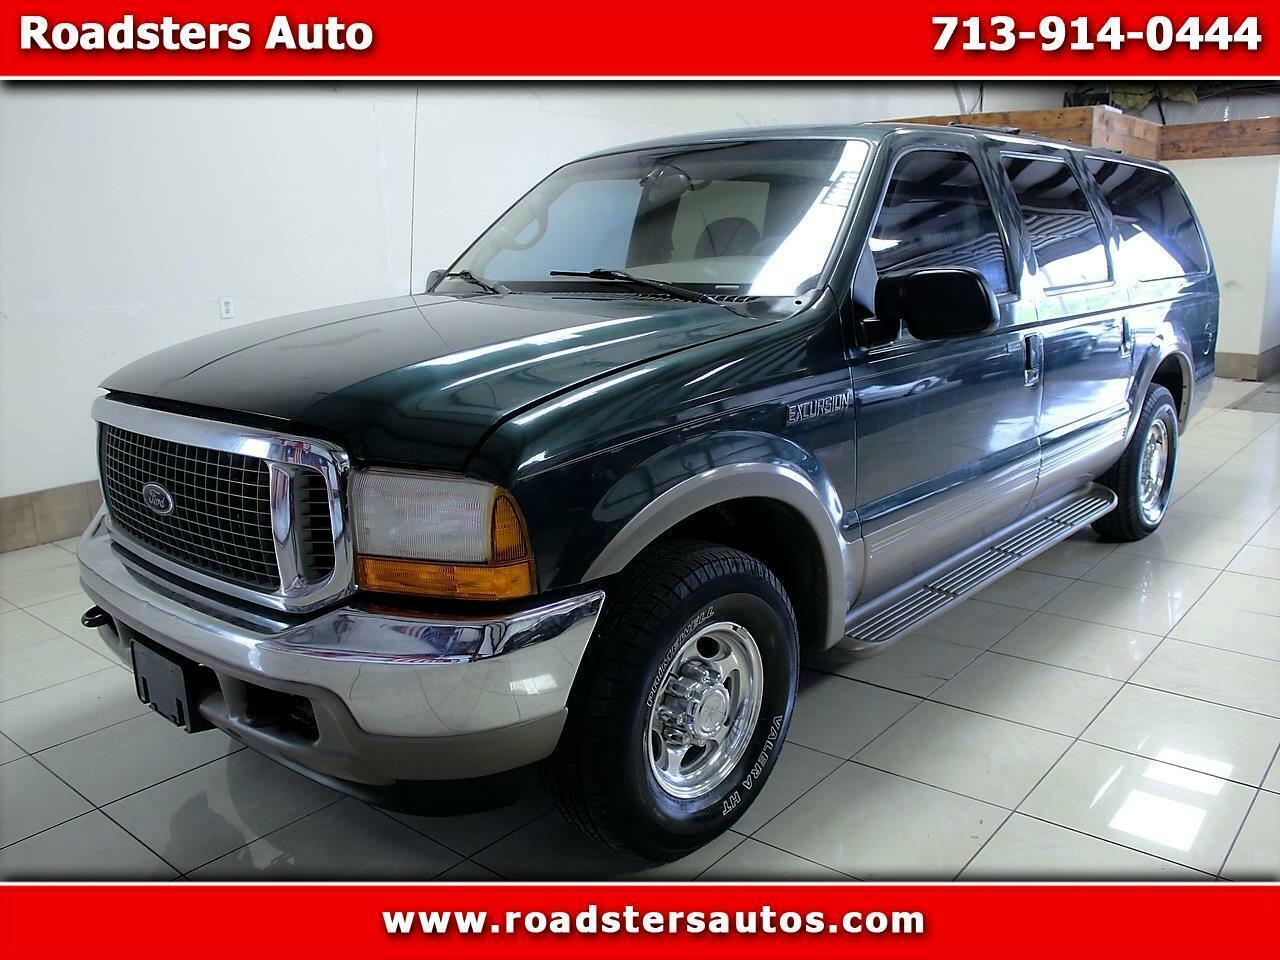 2000 Ford Excursion Limited 2wd